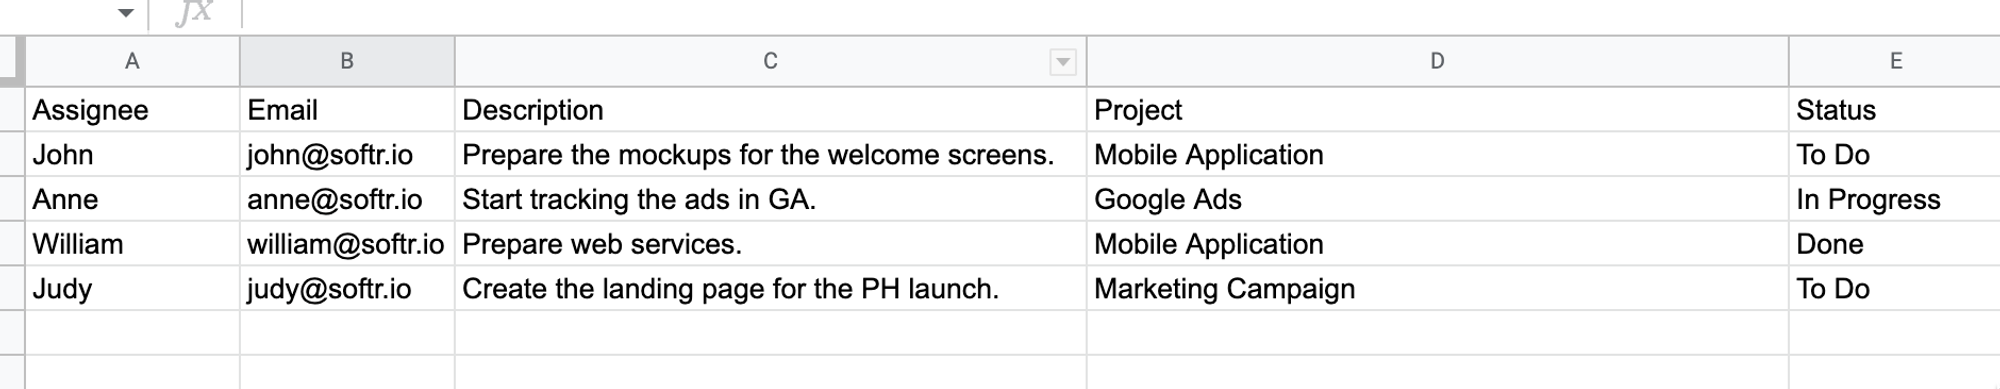 Field names and values on Google Sheets